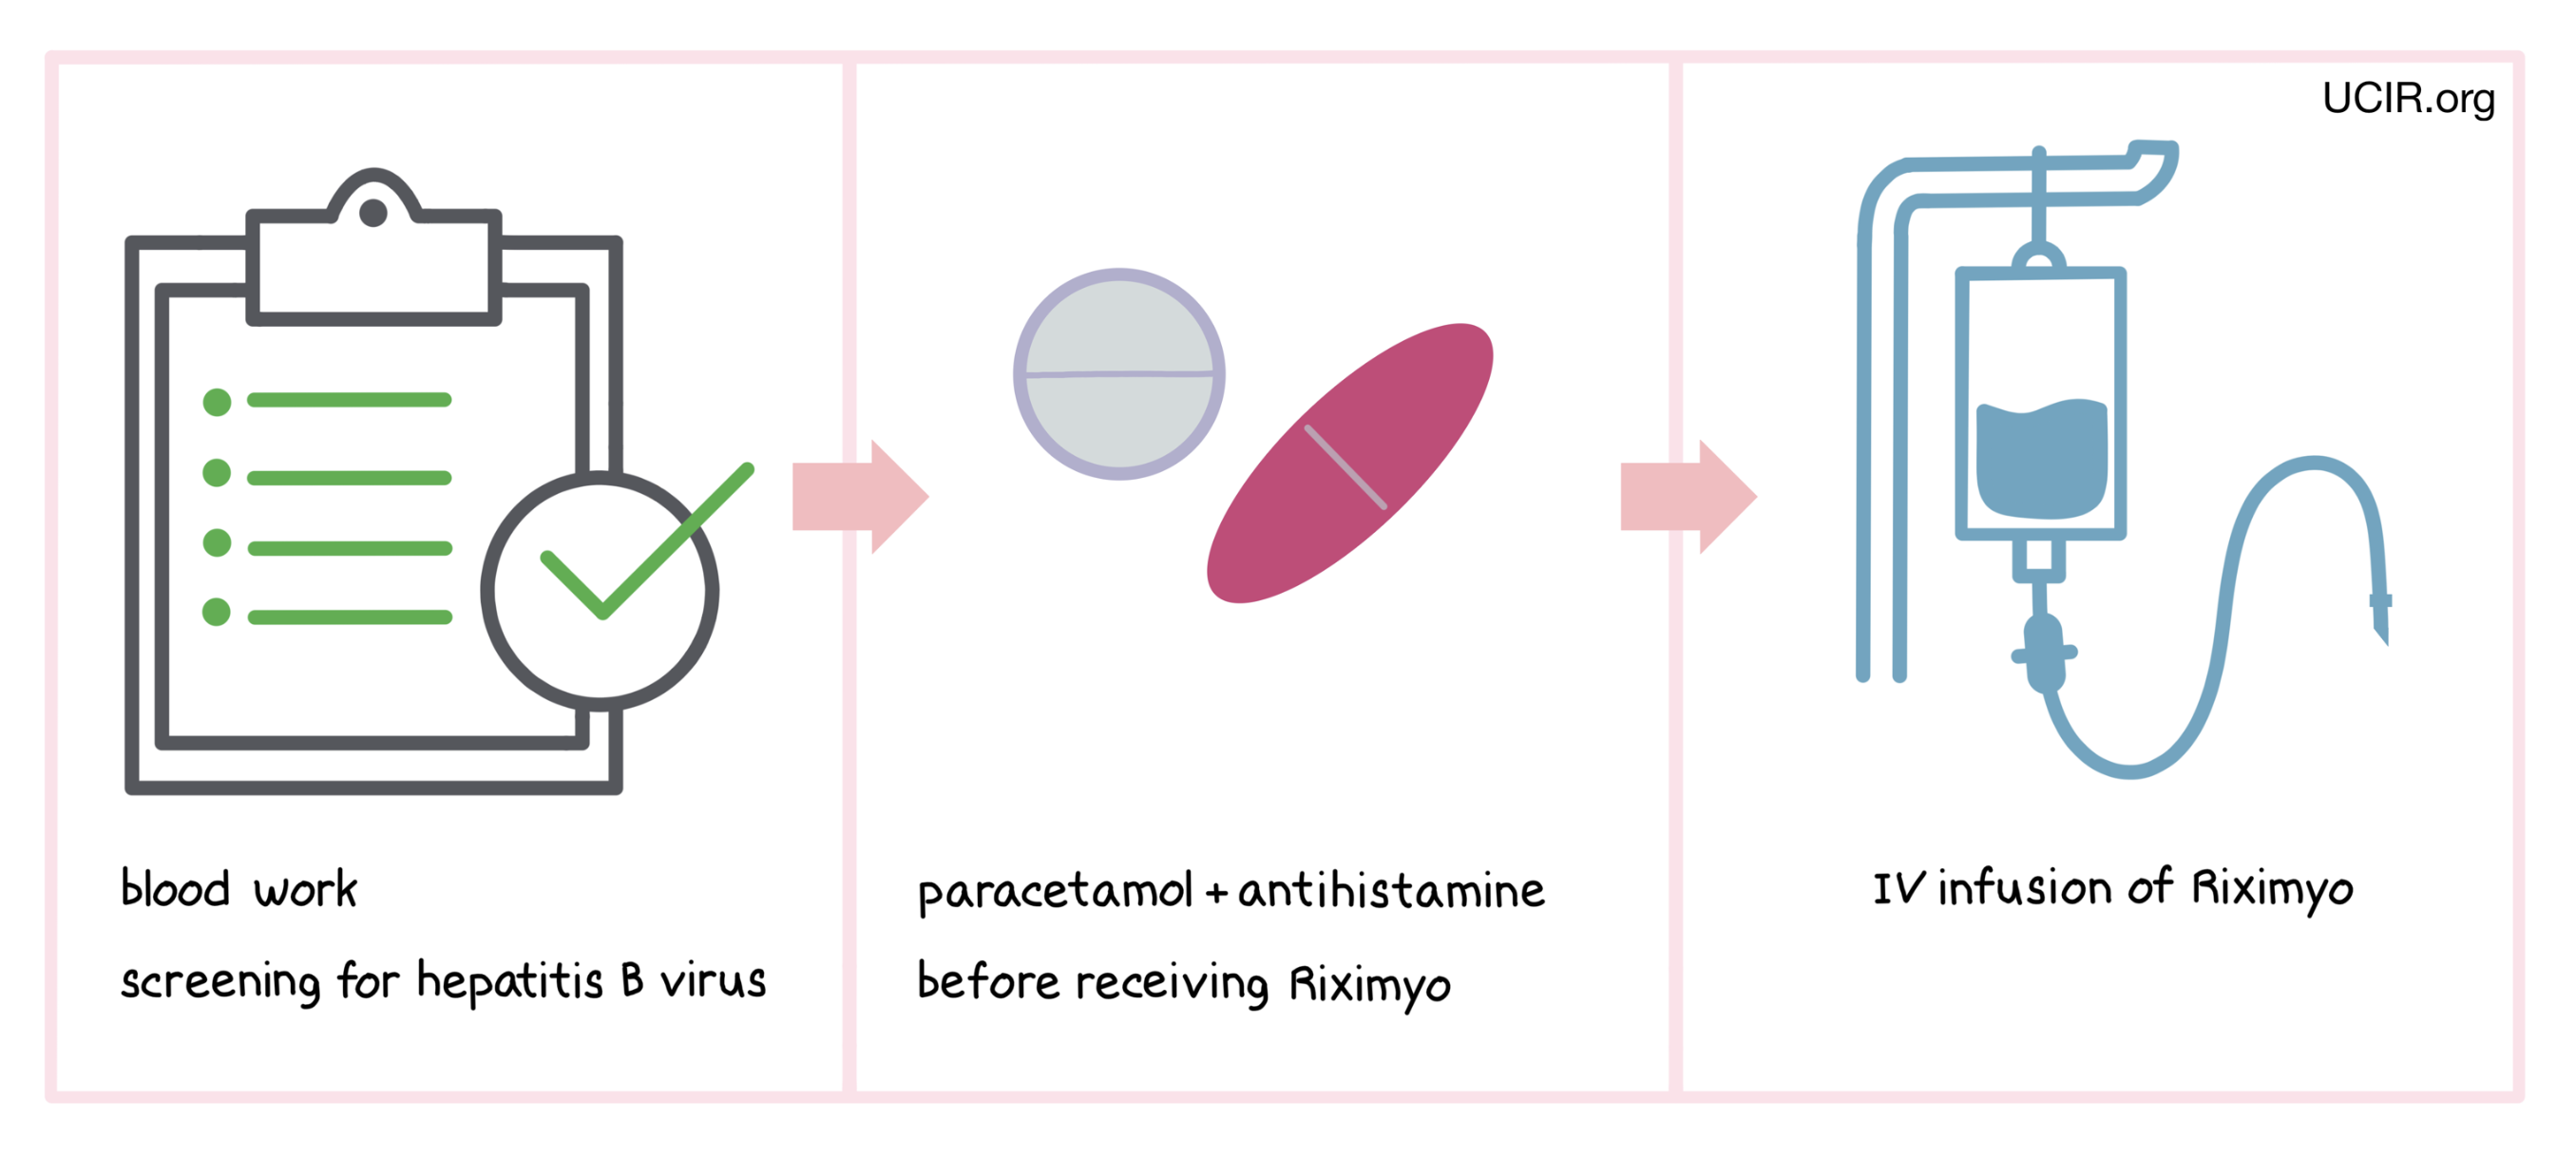 Illustration showing how Riximyo is administered to patients